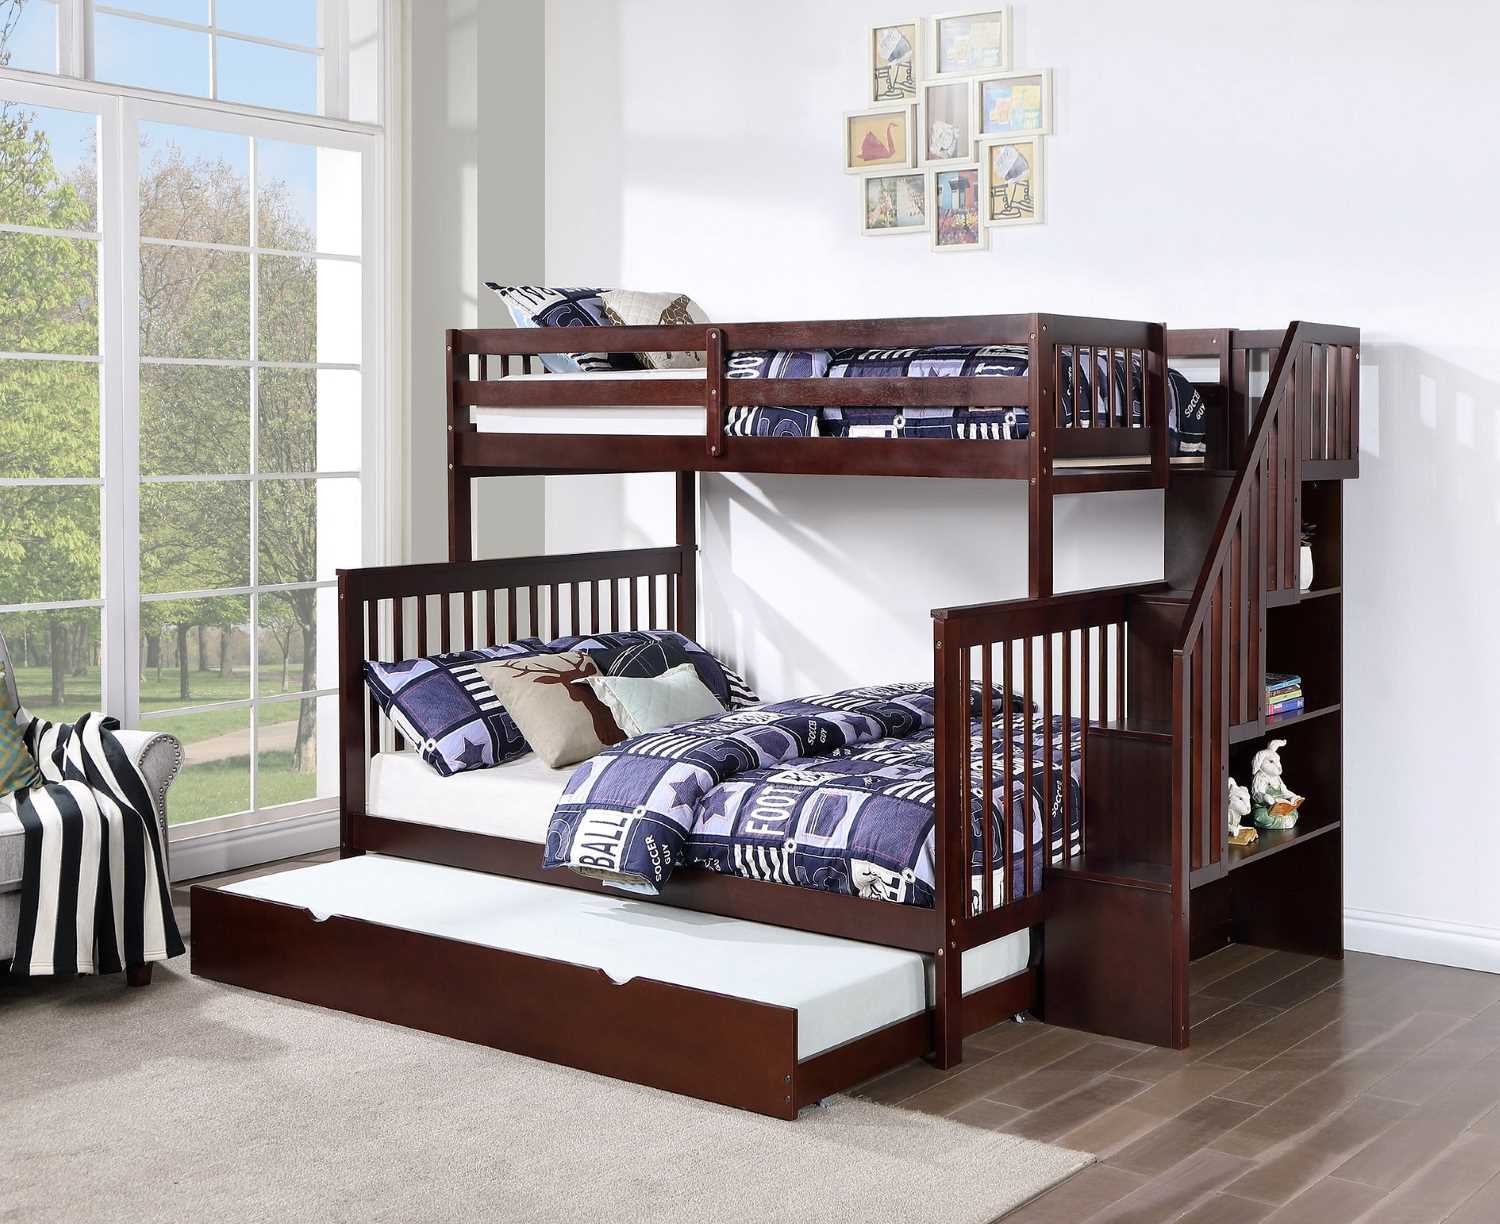 Staircase Bunk Bed with Single Size Pull-Out Trundle- Espresso 1850 Single/Double